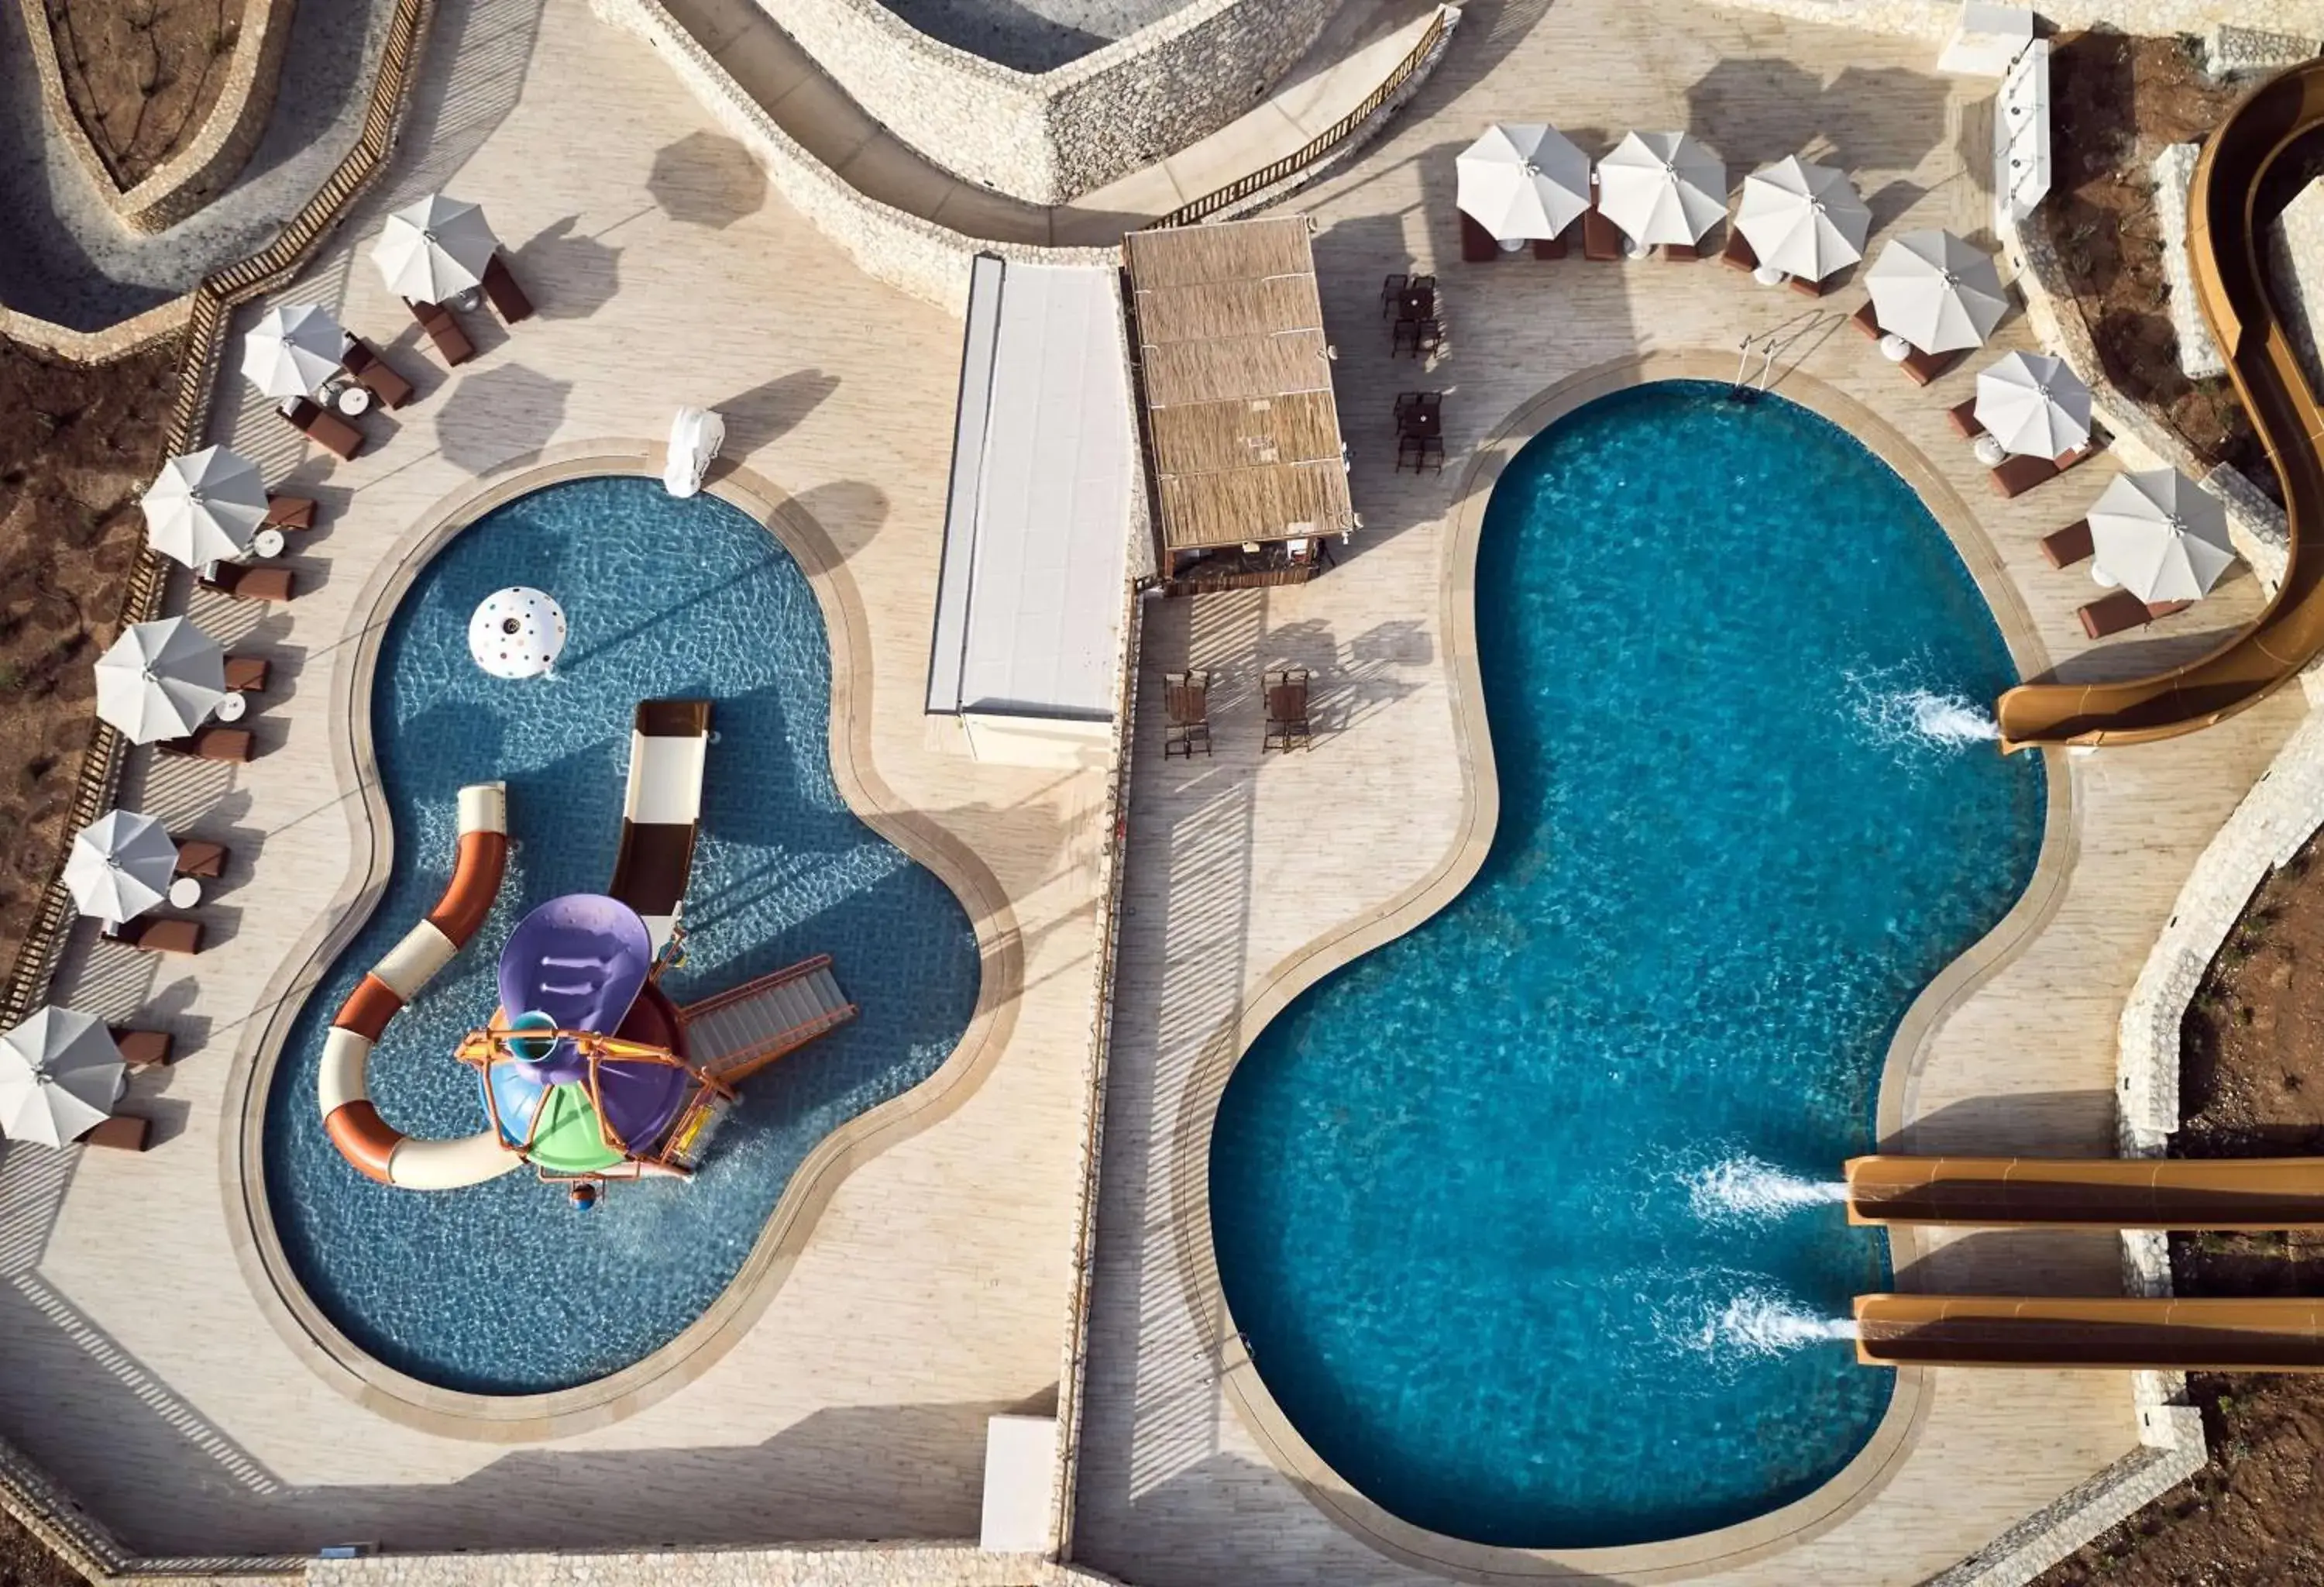 children, Pool View in The Royal Senses Resort Crete, Curio Collection by Hilton